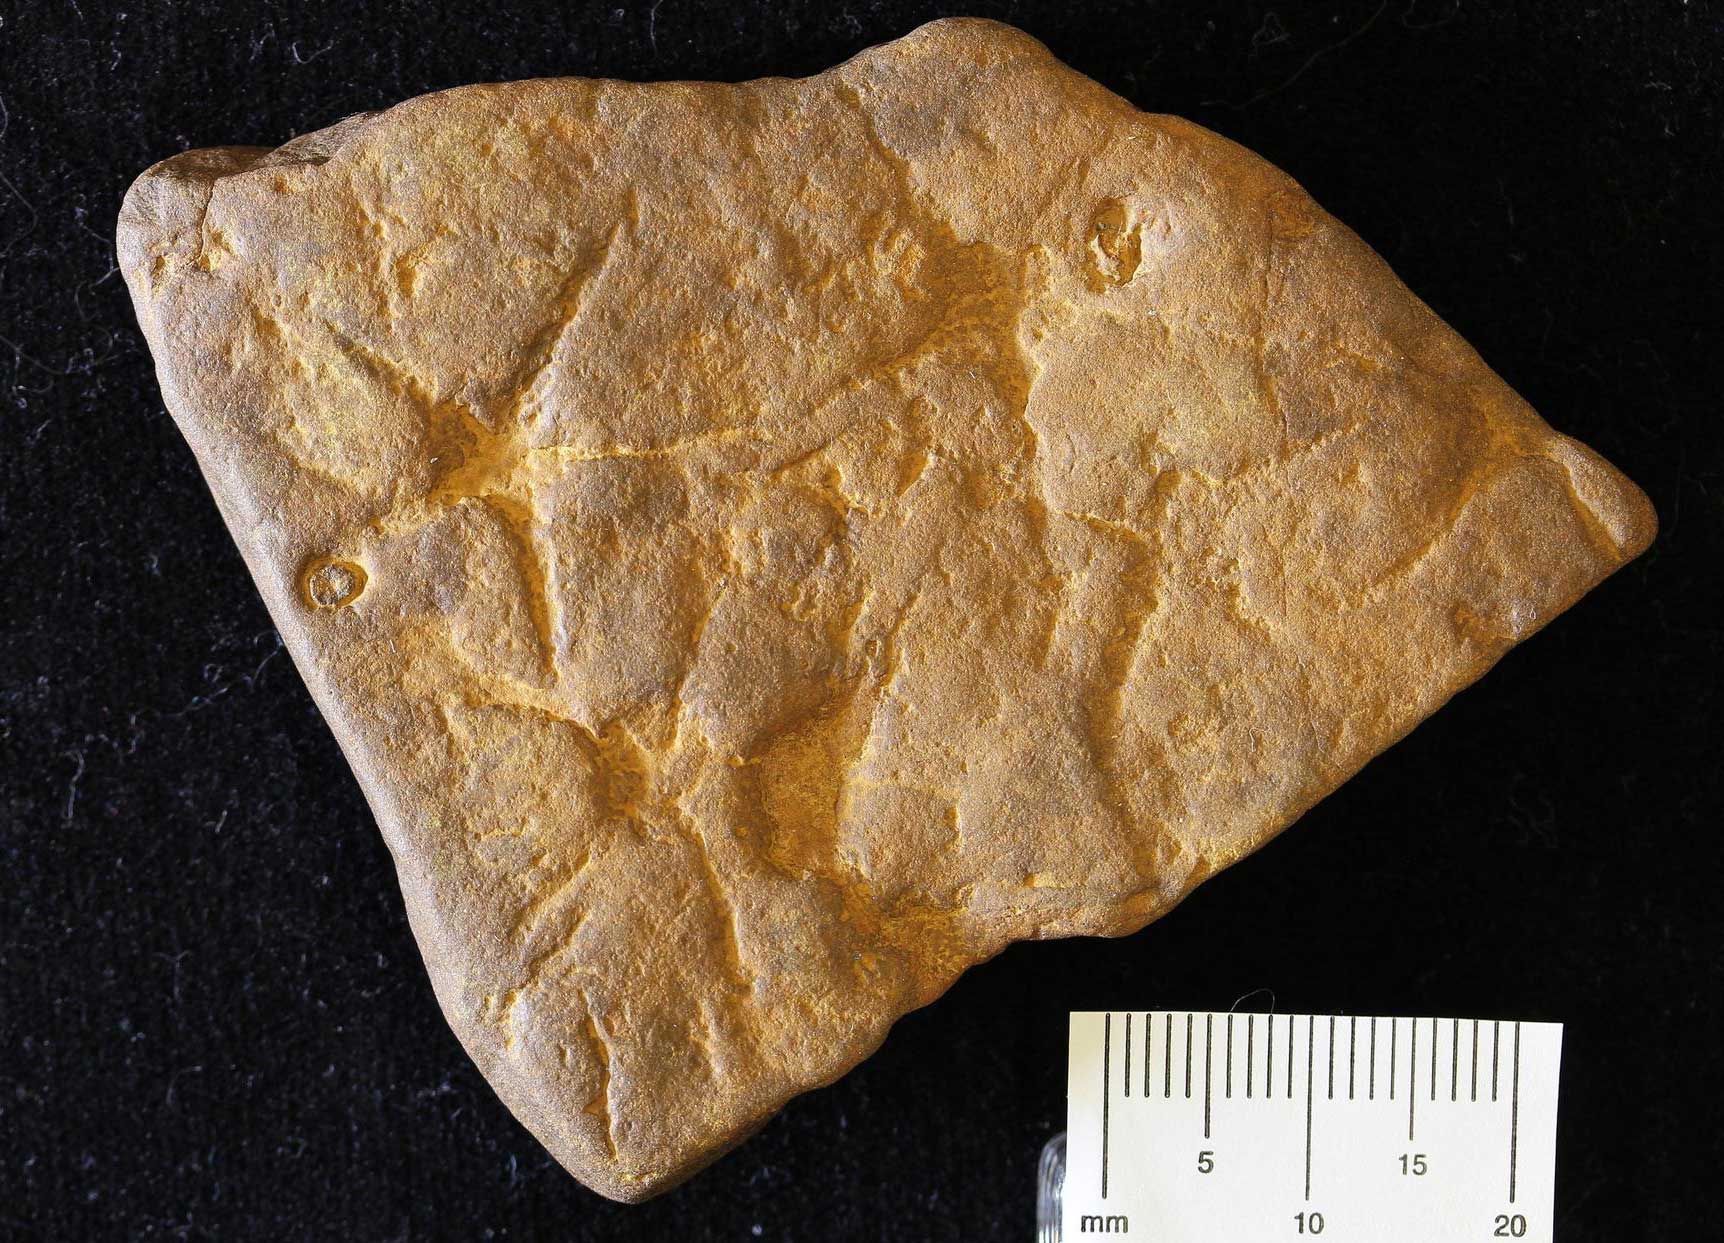 Photograph of a light brown rock with impressions of sea stars on the surface. The rock is from the Miocene of Maryland.